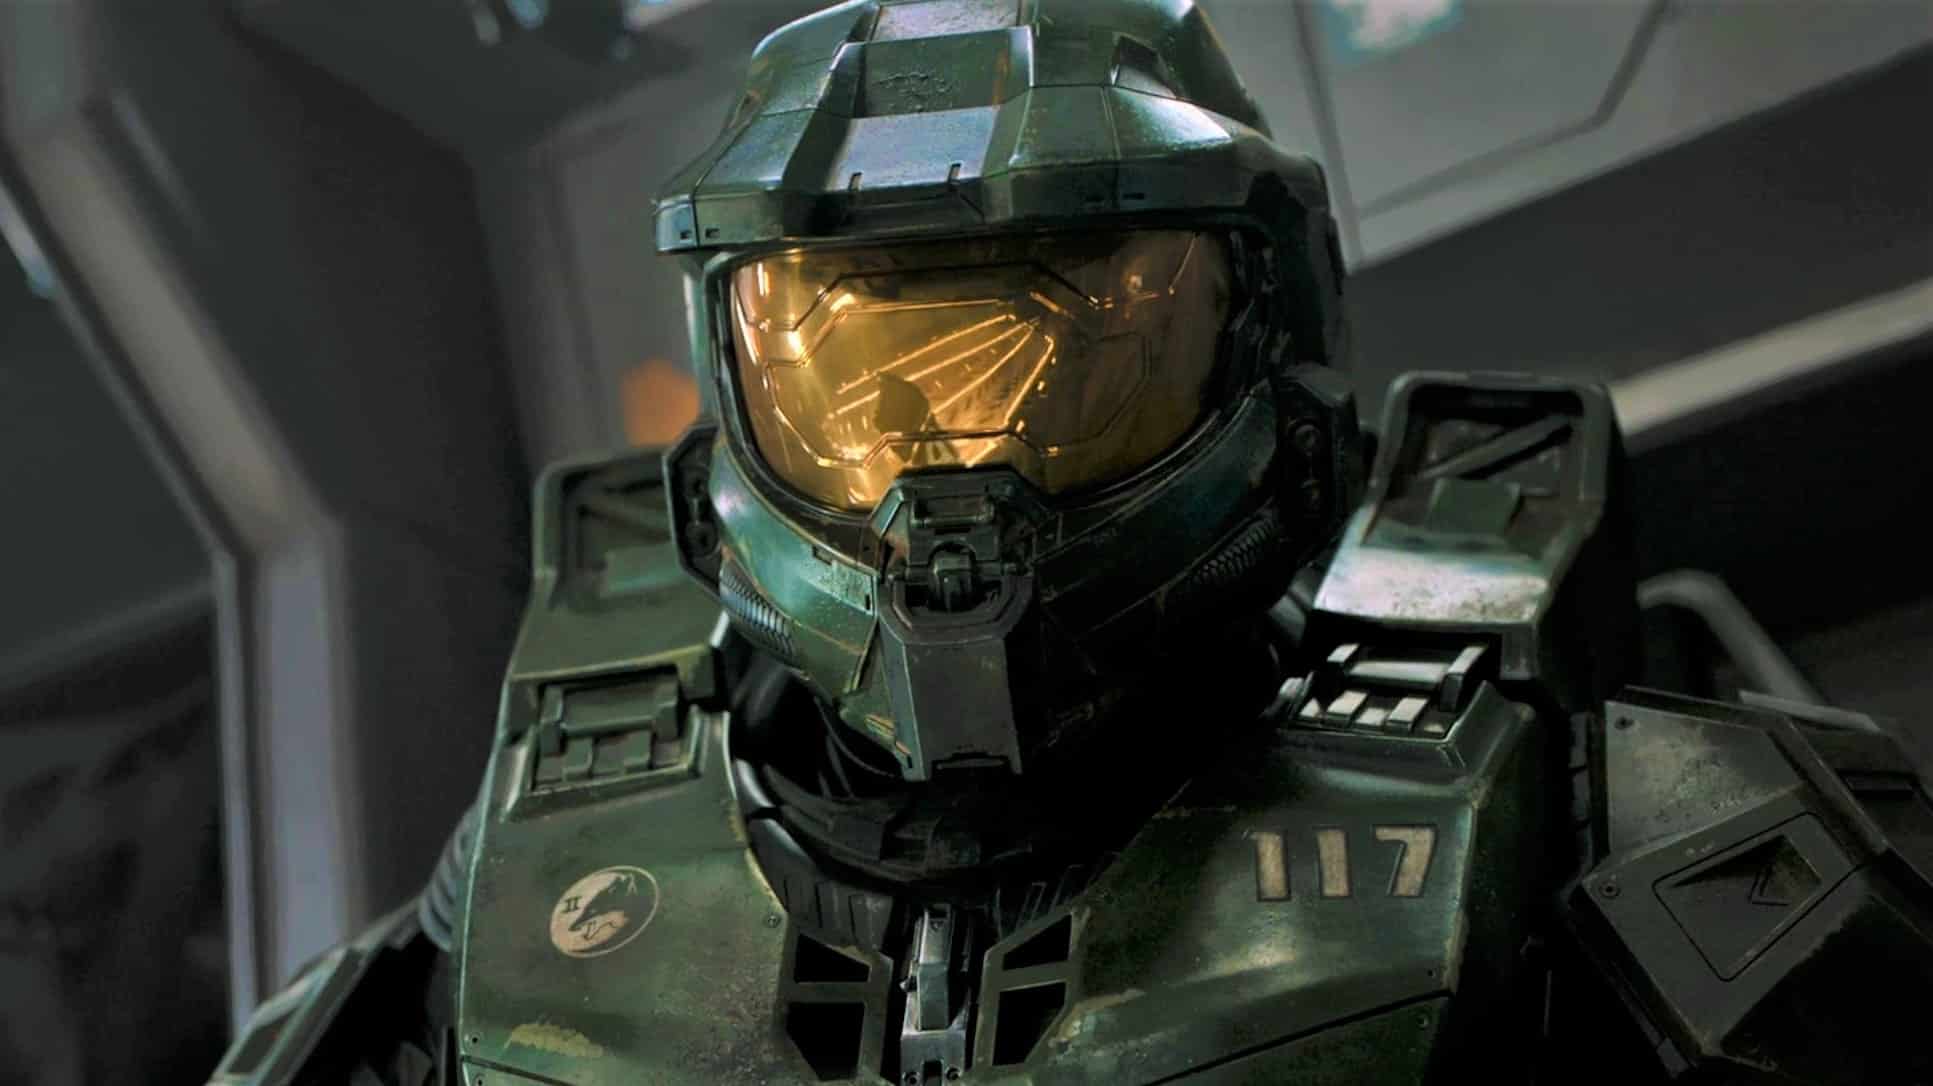 Meet Master Chief in a new Halo preview scene.